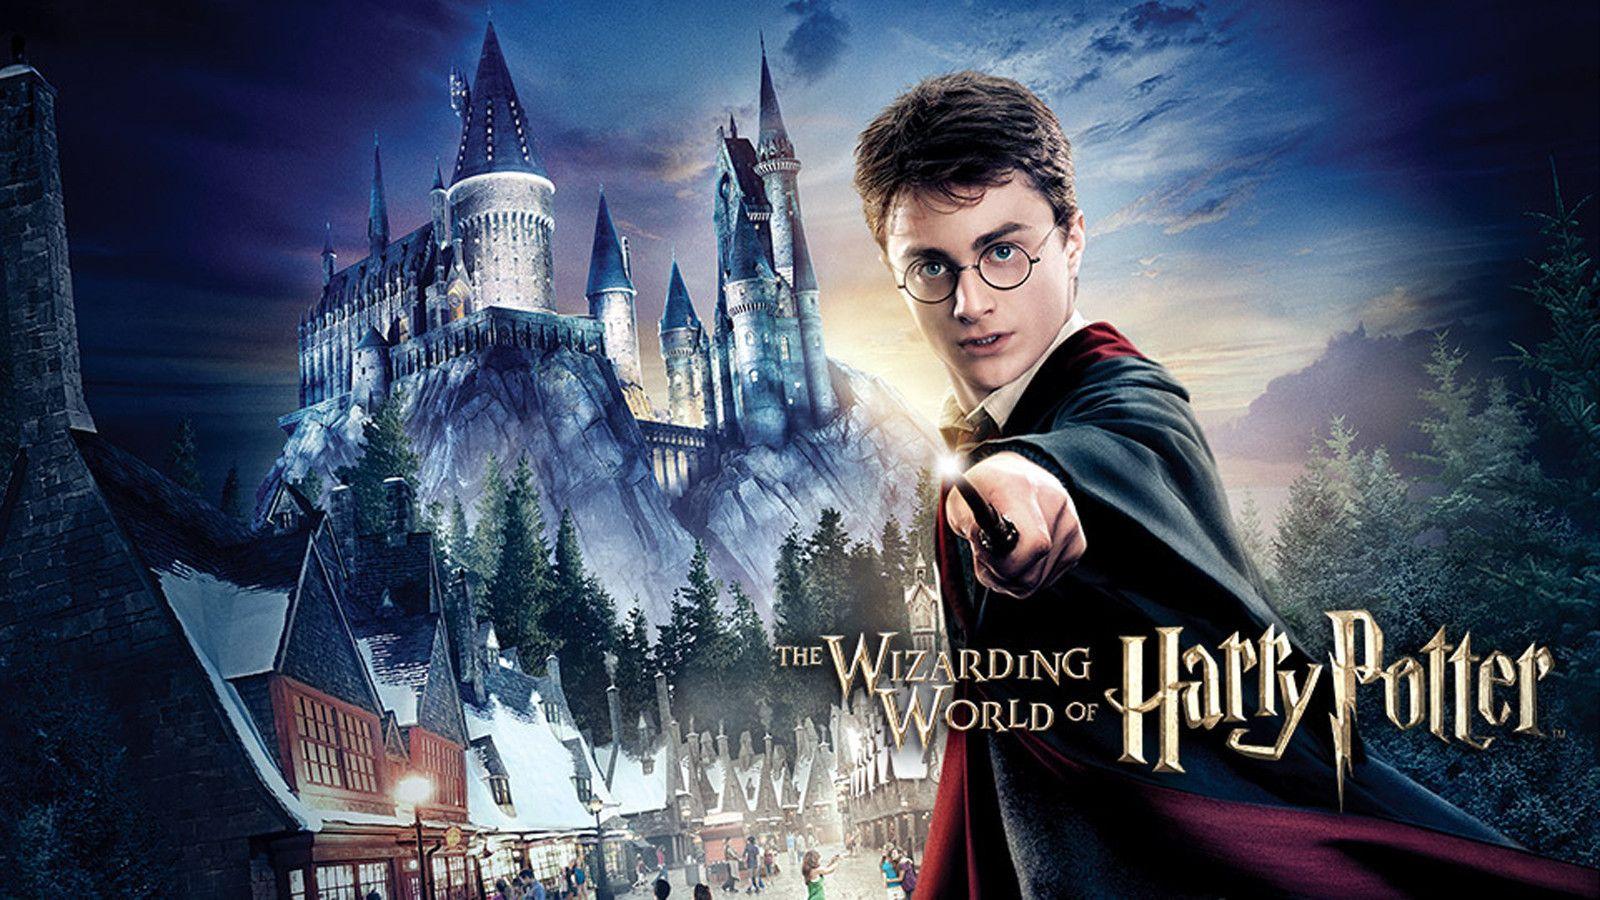 HD Harry Potter Picture, Live Harry Potter Wallpaper (PICWP)